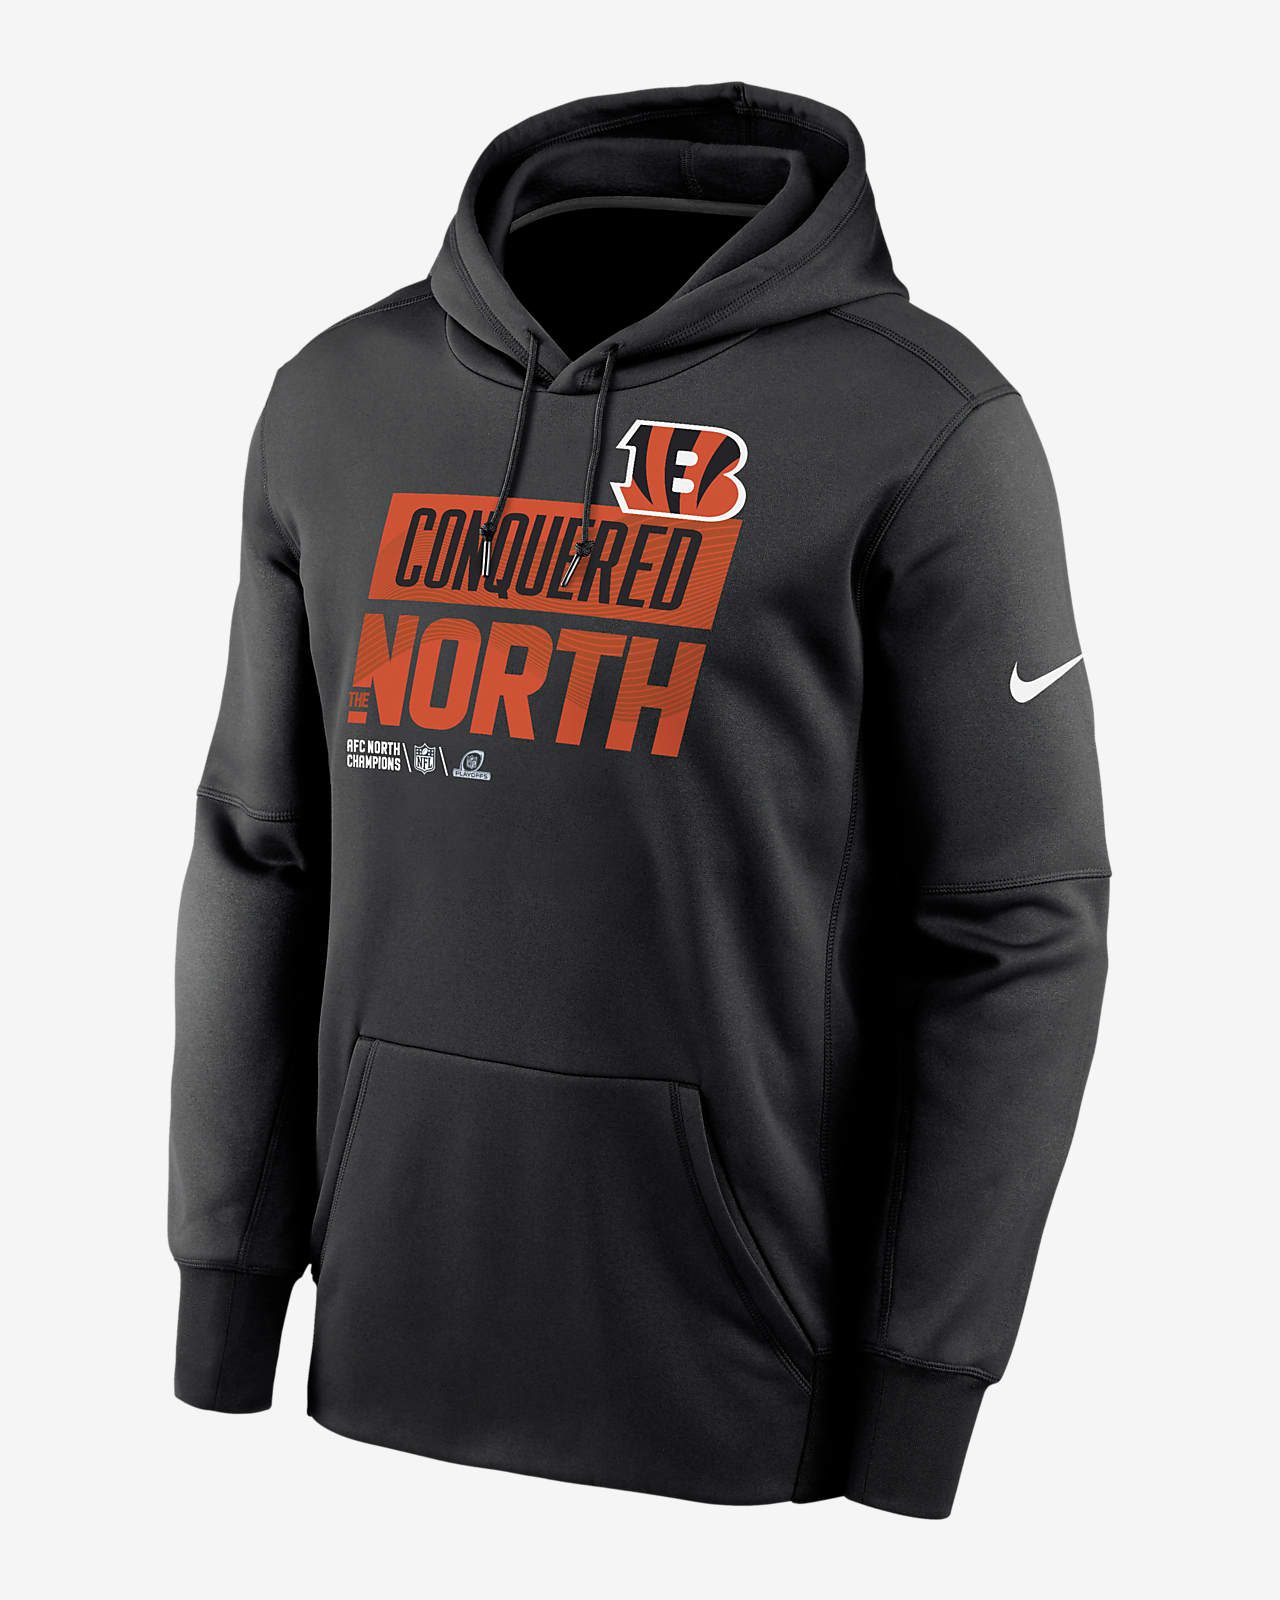 bengals afc north champs hoodie